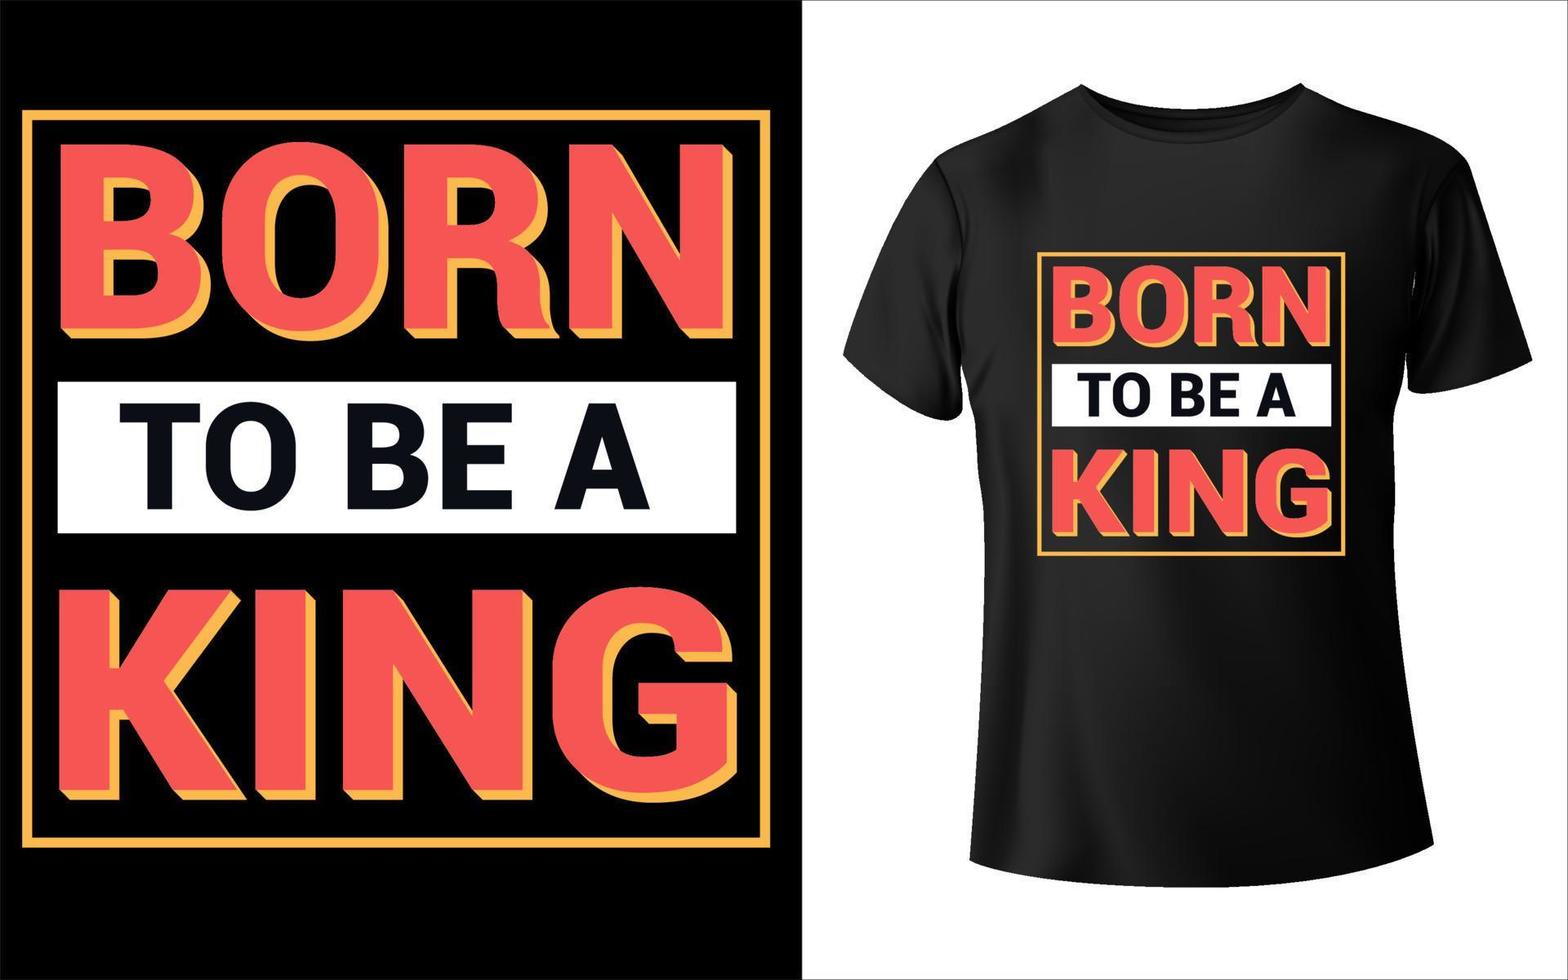 Born to be a king t shirt design vector